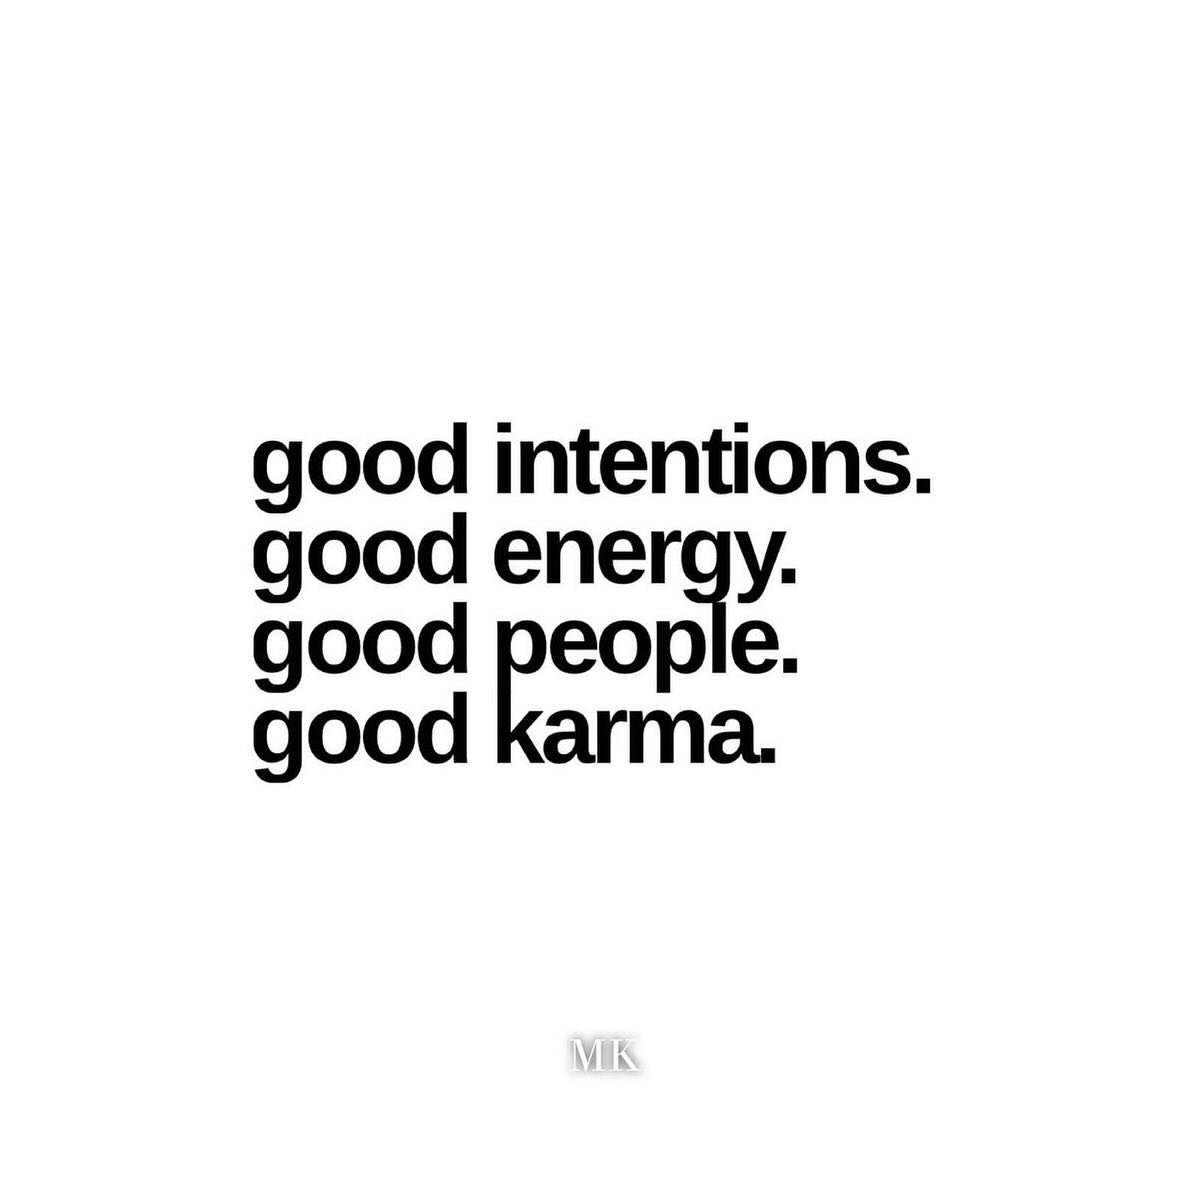 Only good vibes! ❤️⚡️ #peaceloveandwisdom #repost @words_by_mk